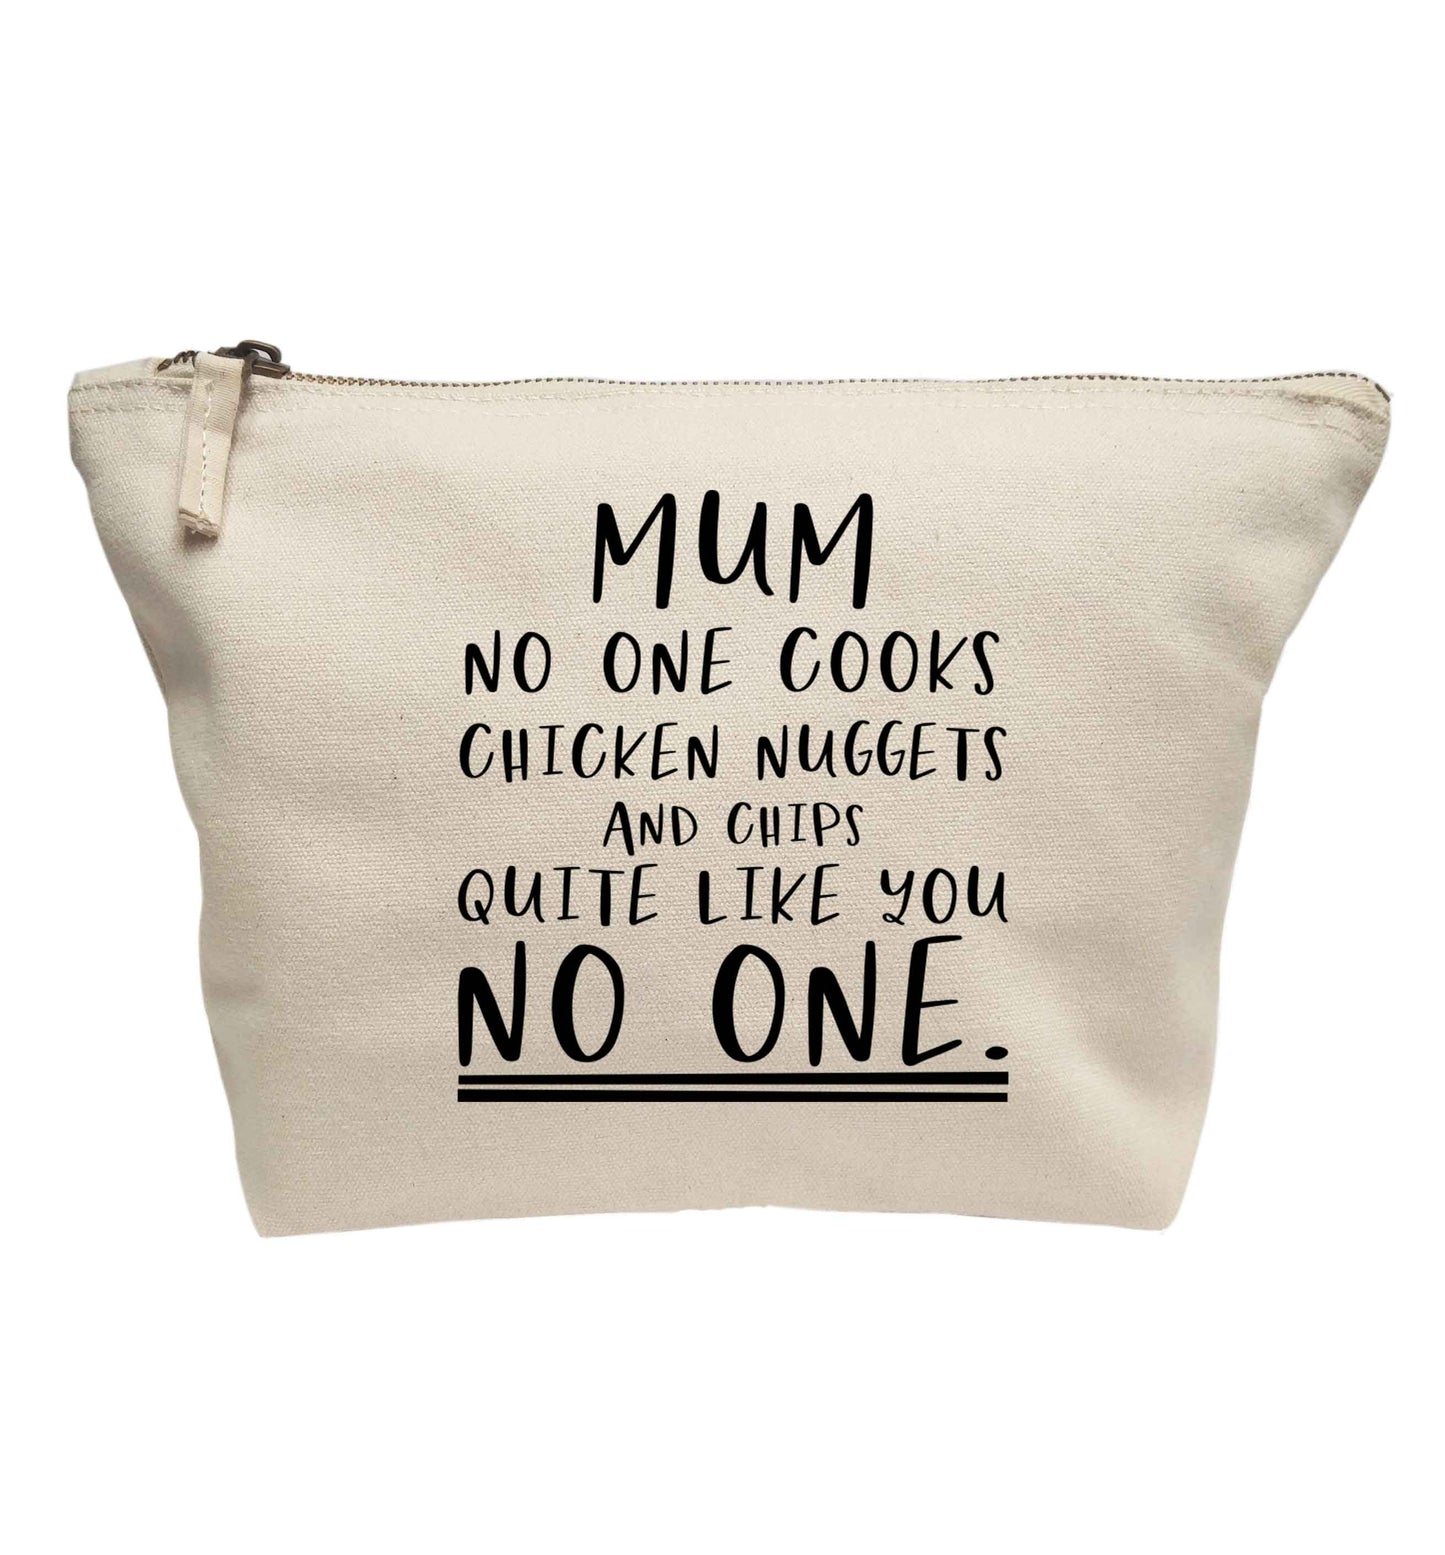 Mum no one cooks chicken nuggets and chips like you no one | Makeup / wash bag